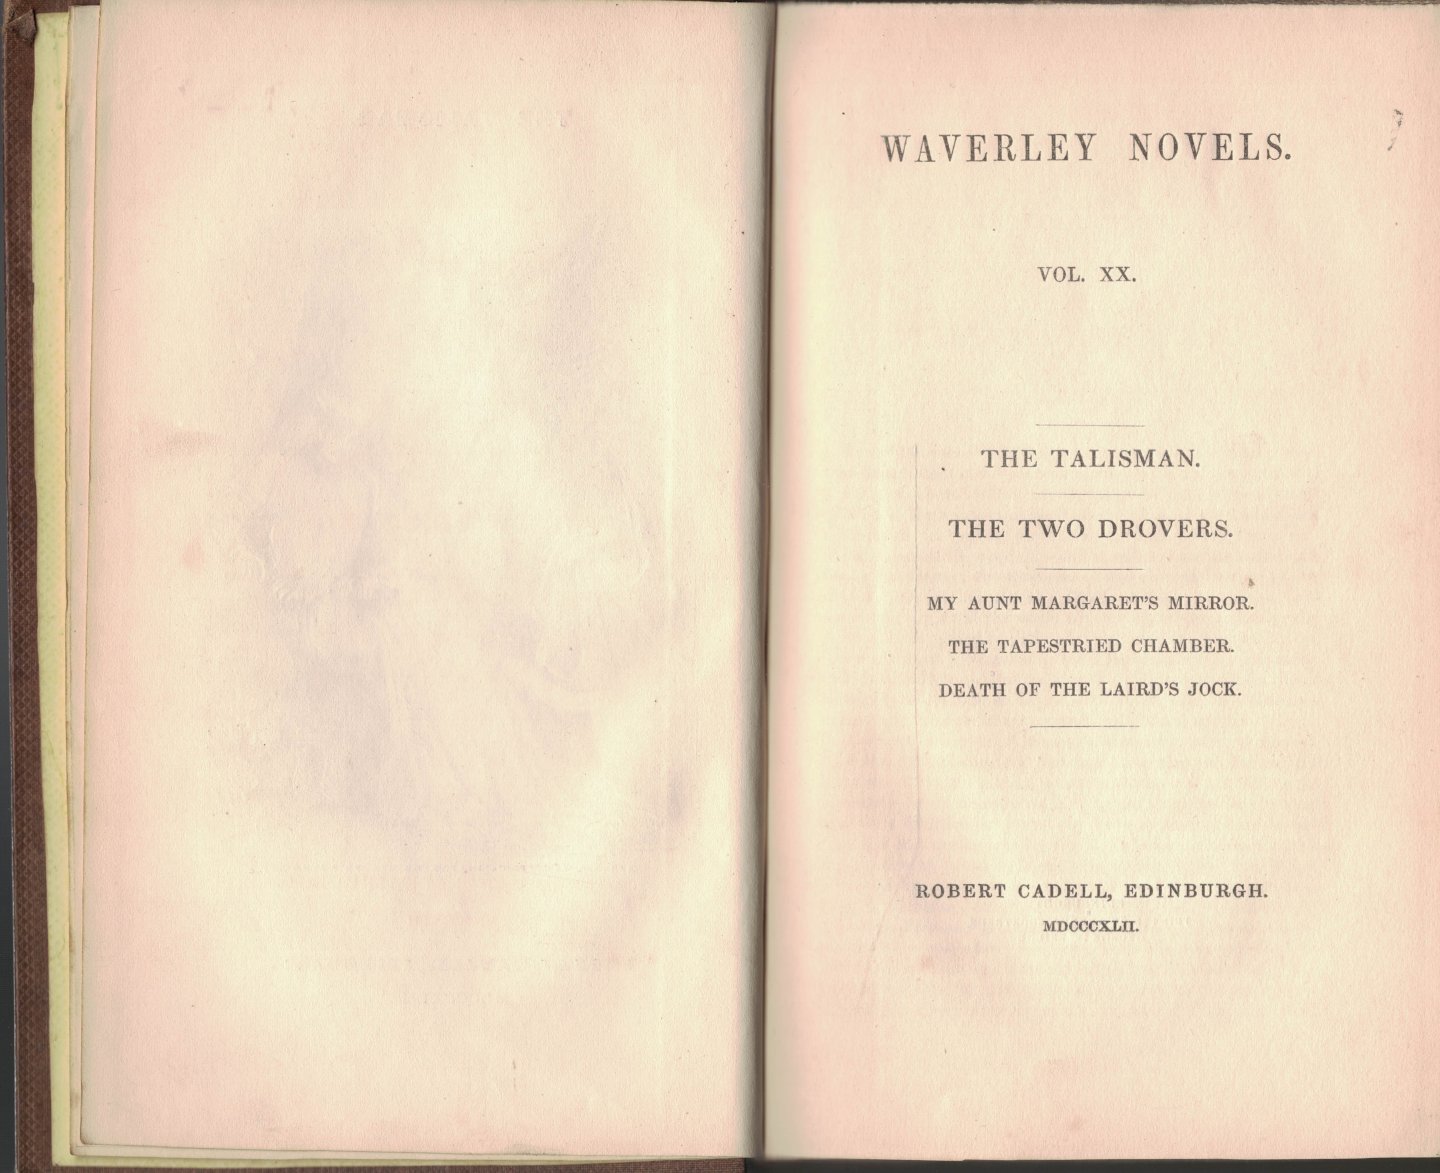 Cadell, Robert - Waverley Novels Vol. XX - The Talisman / The two drovers - My Aunt Margaret`s Mirror, The Tapestried Chamber, Death of the Laird`s Jock